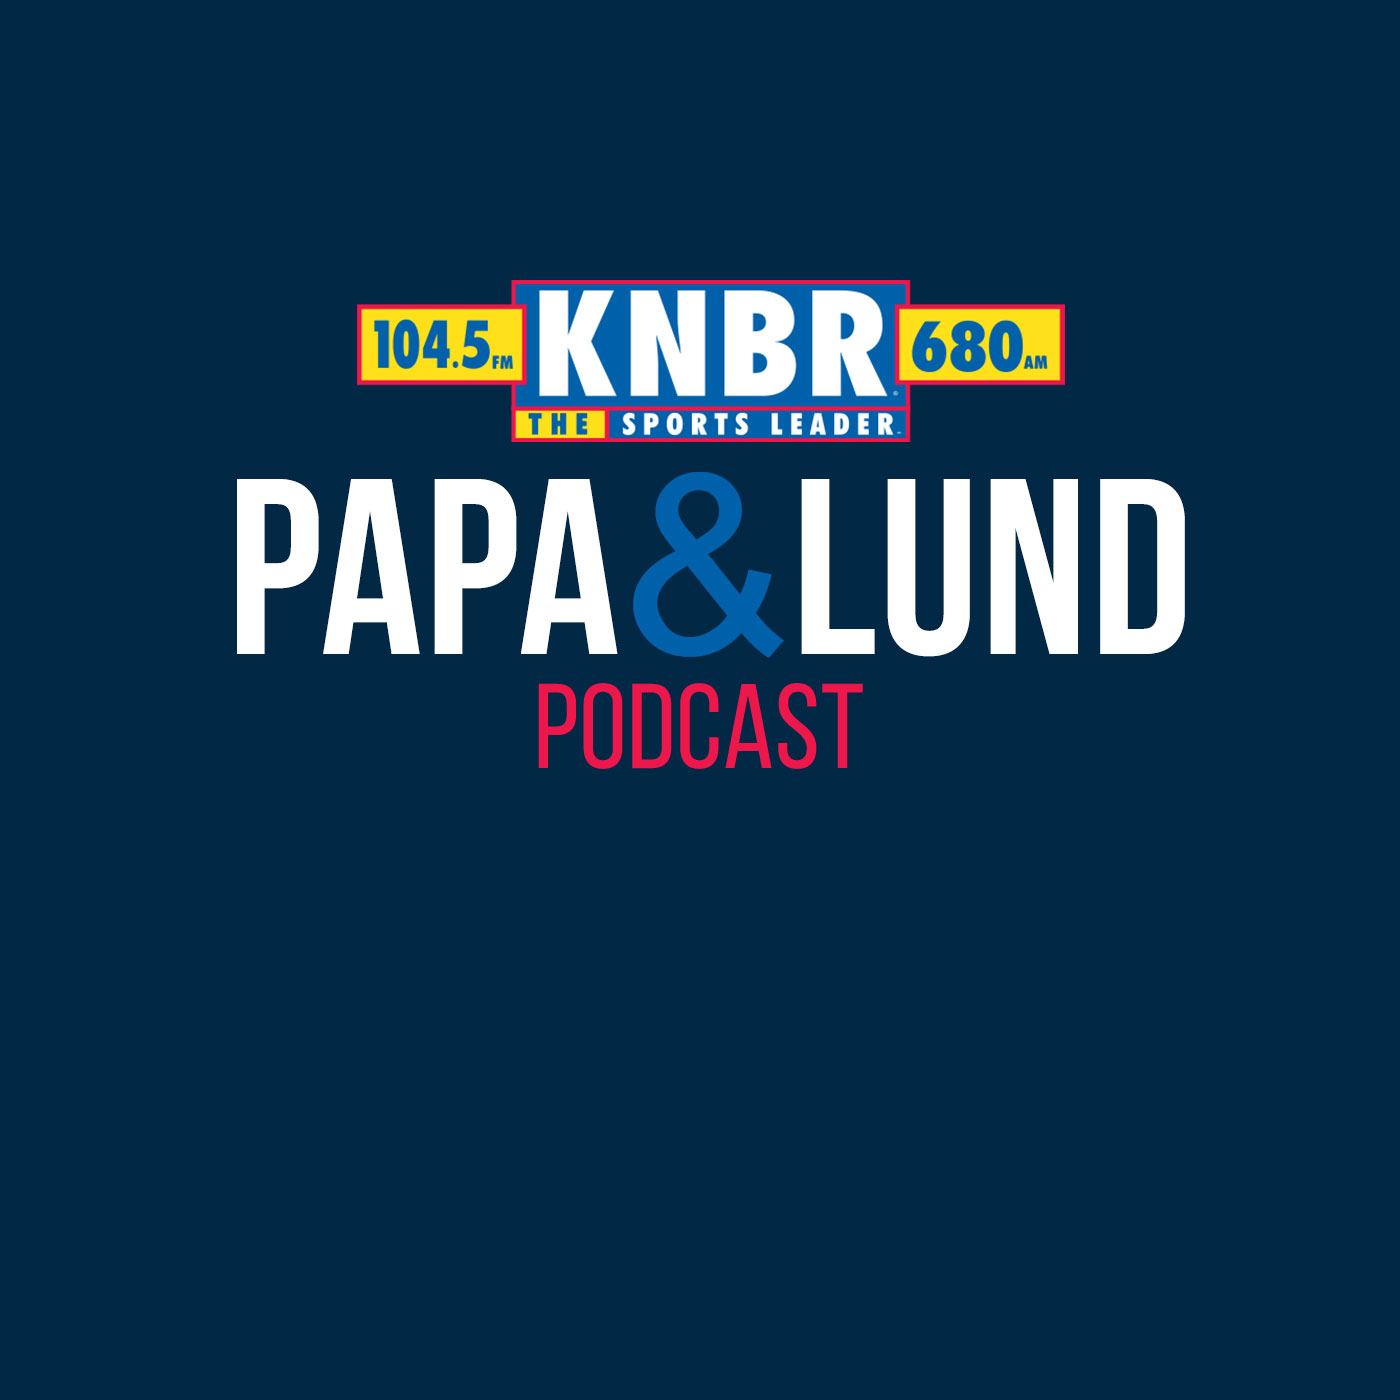 11-10 Steve Wyche joins Papa & Lund to discuss Niners vs. Jags matchup and the current NFL postseason picture